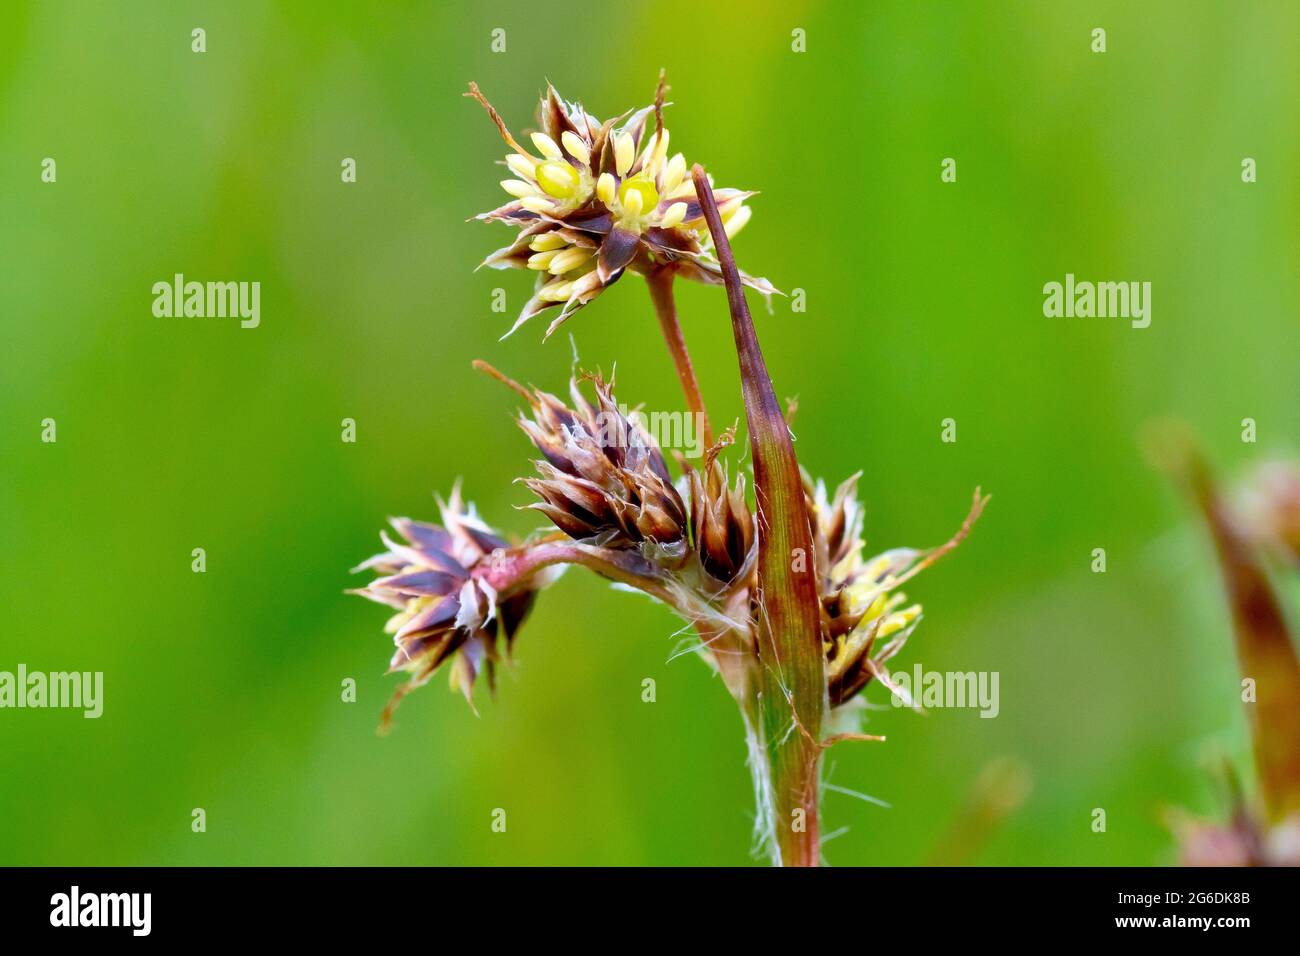 Field Wood Rush (luzula campestris), also known as Good Friday Grass, close up of a single plant in flower. Stock Photo